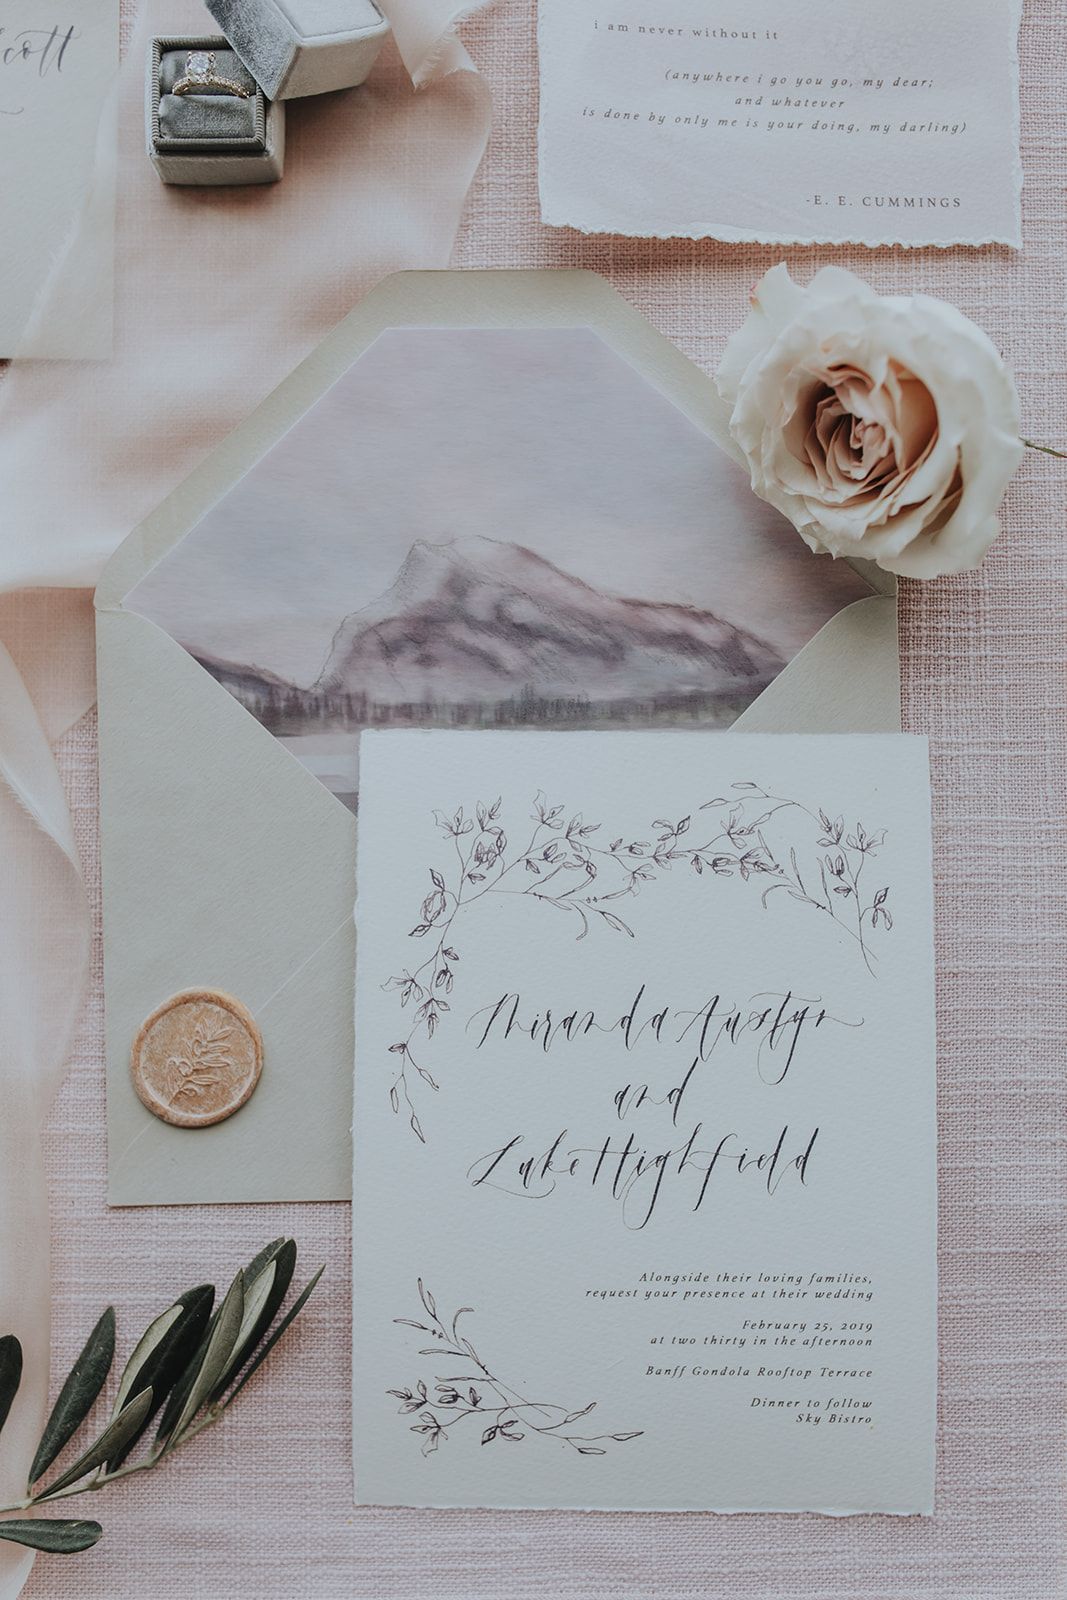 Covid-19 and Your Wedding // Part Three: Tips From The Pros - on the Bronte Bride Blog. Tips & Advice on Wedding Postponement, from local Albertan wedding photographers, planners, & other vendors, wedding stationery, wedding invitations